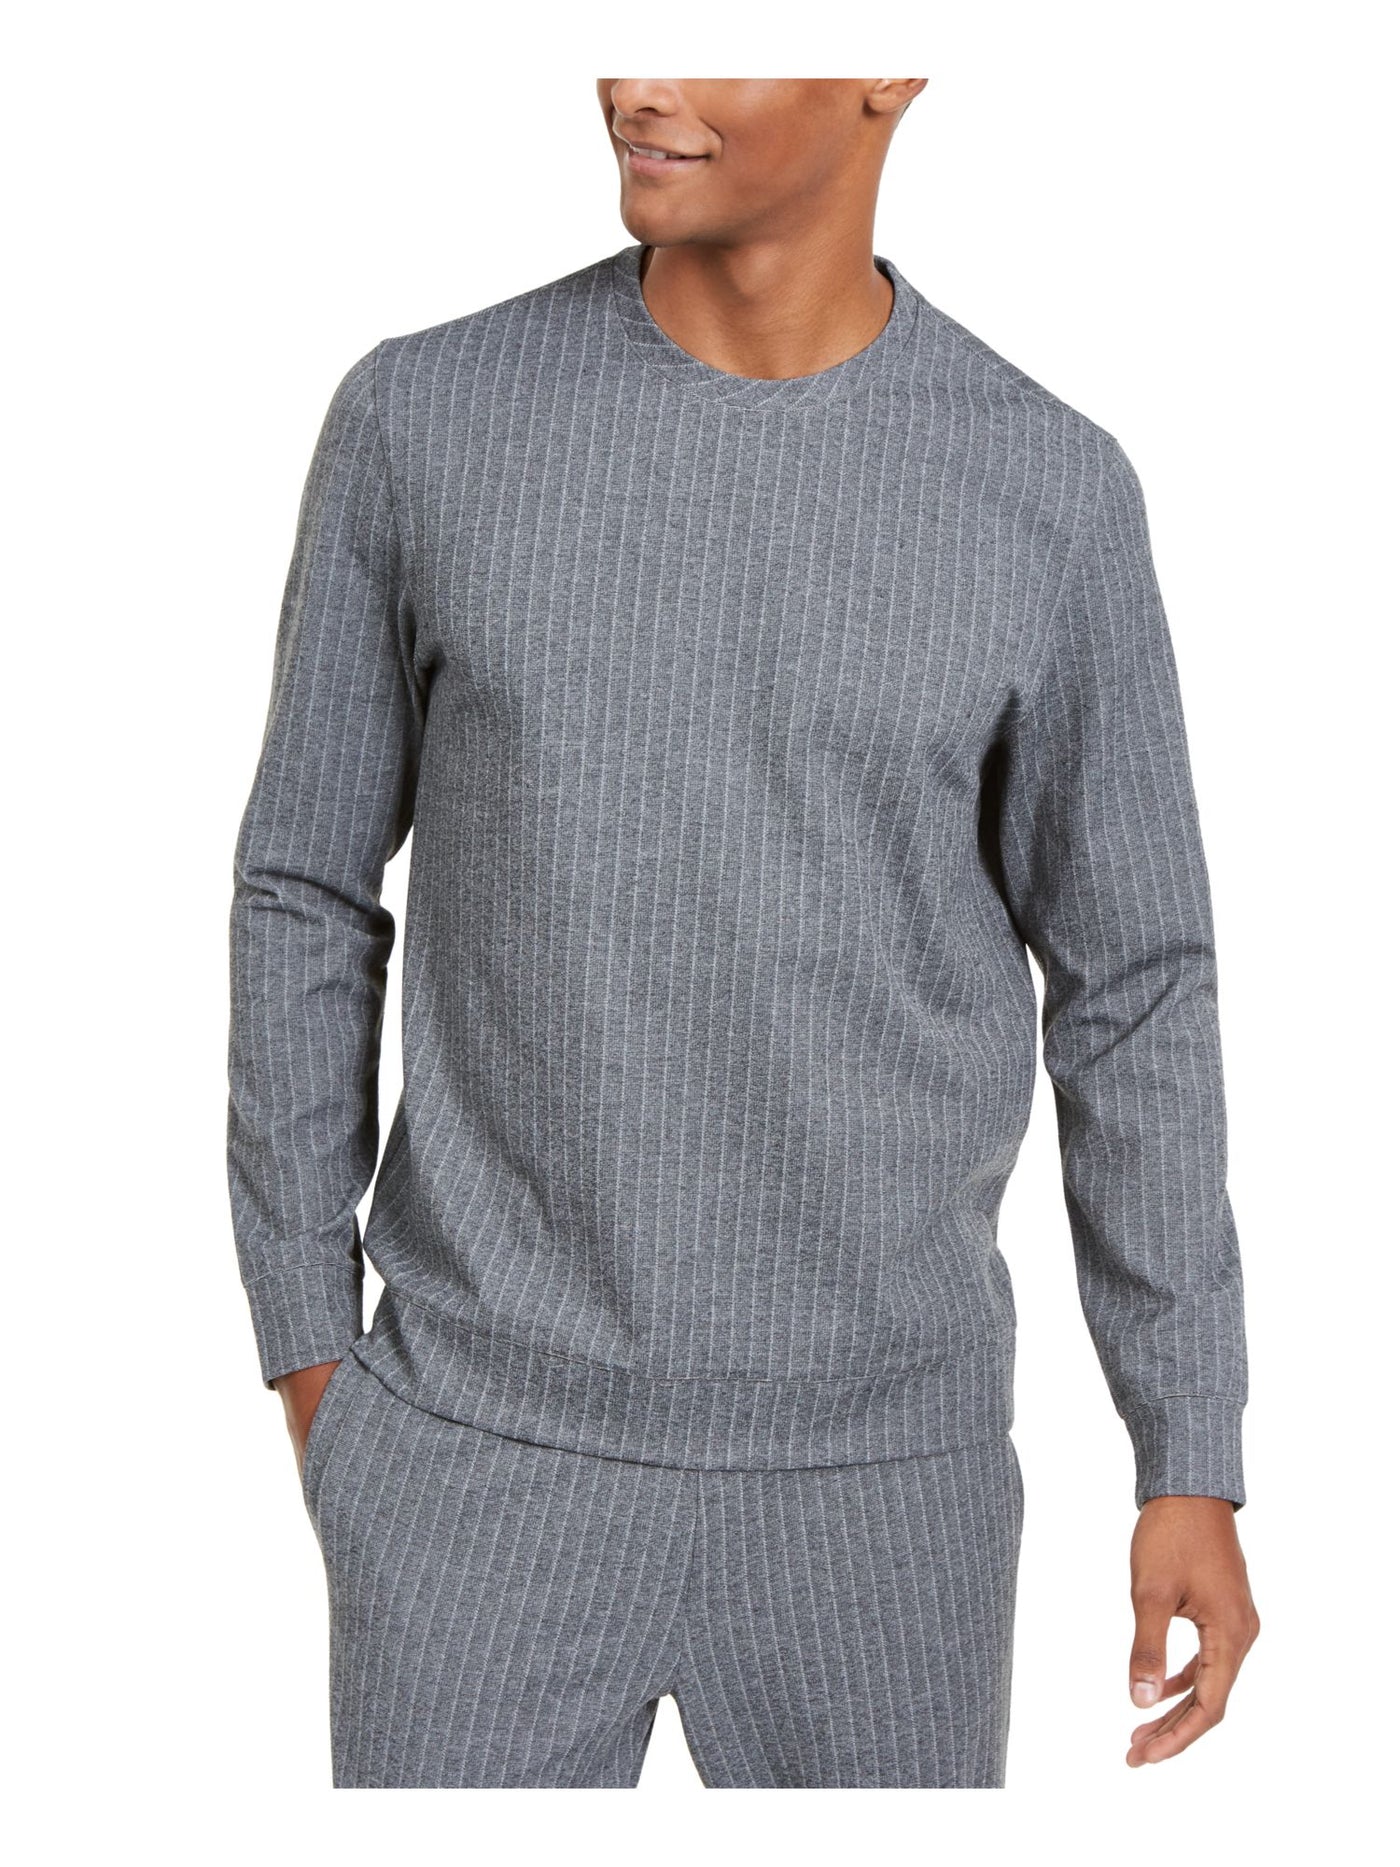 ALFANI Mens Gray Pinstripe Long Sleeve Crew Neck Classic Fit Stretch Pullover Sweater S